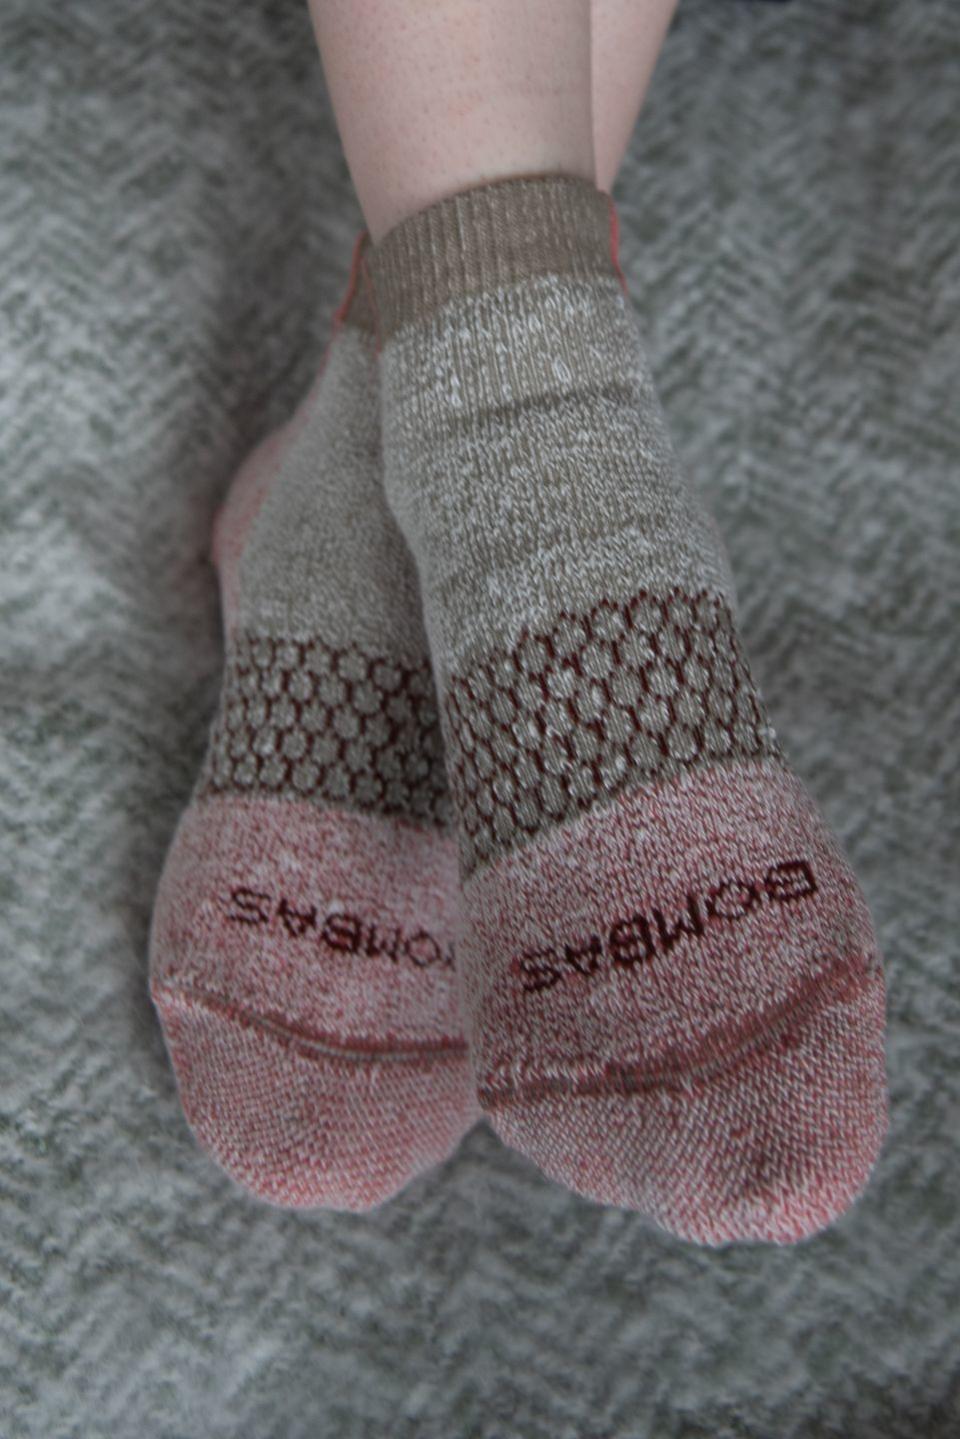 a pair of pale red and beige socks